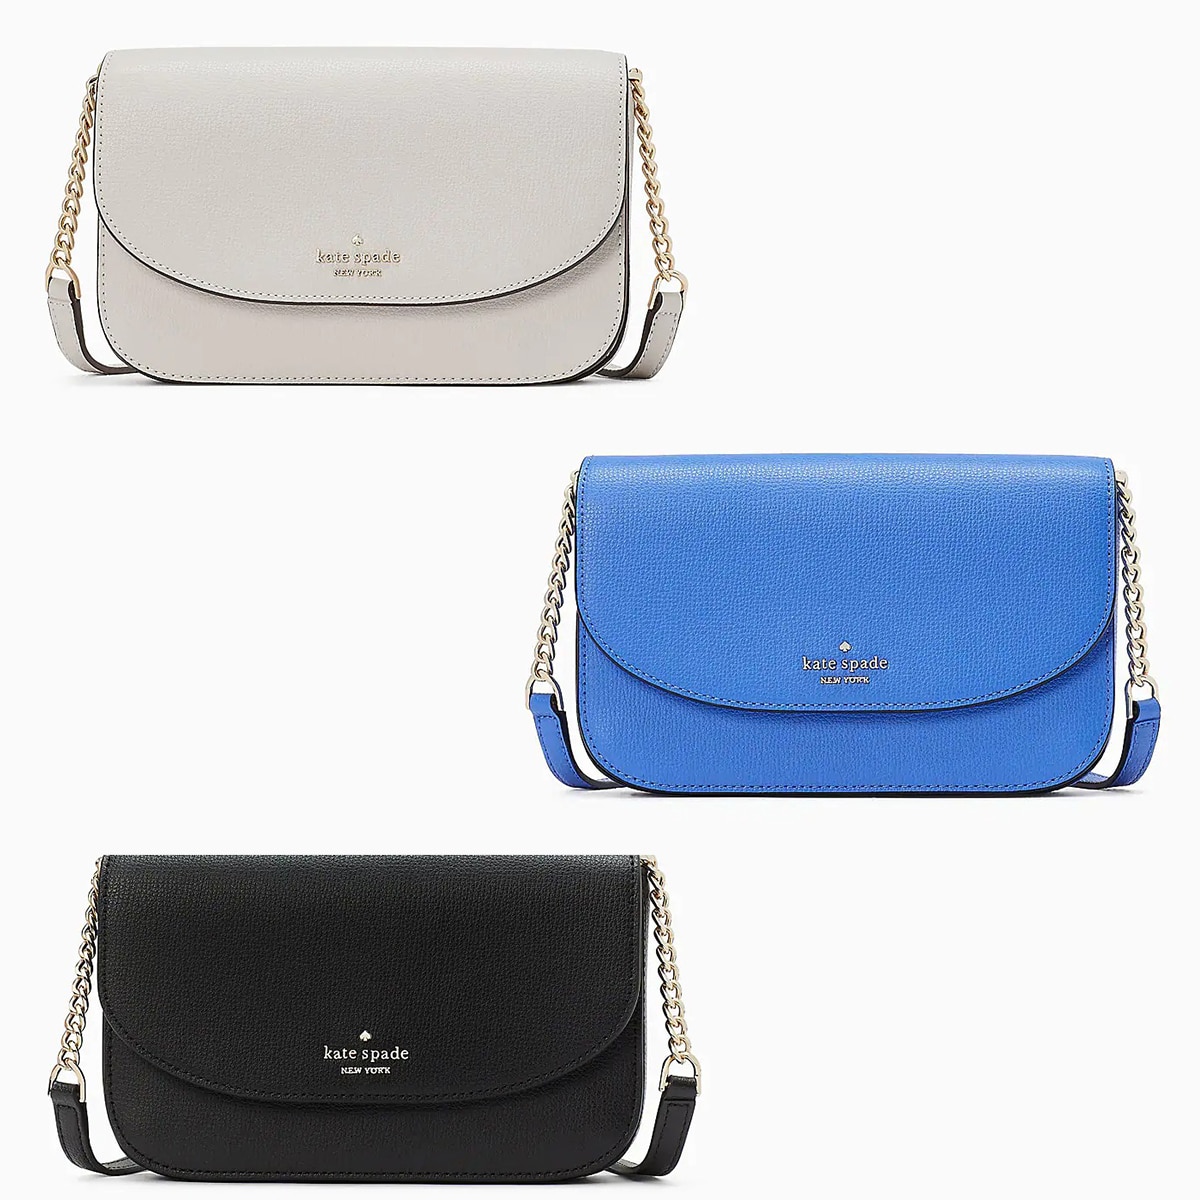 Kate Spade Sale: Double Discounts on Handbags Until Midnight